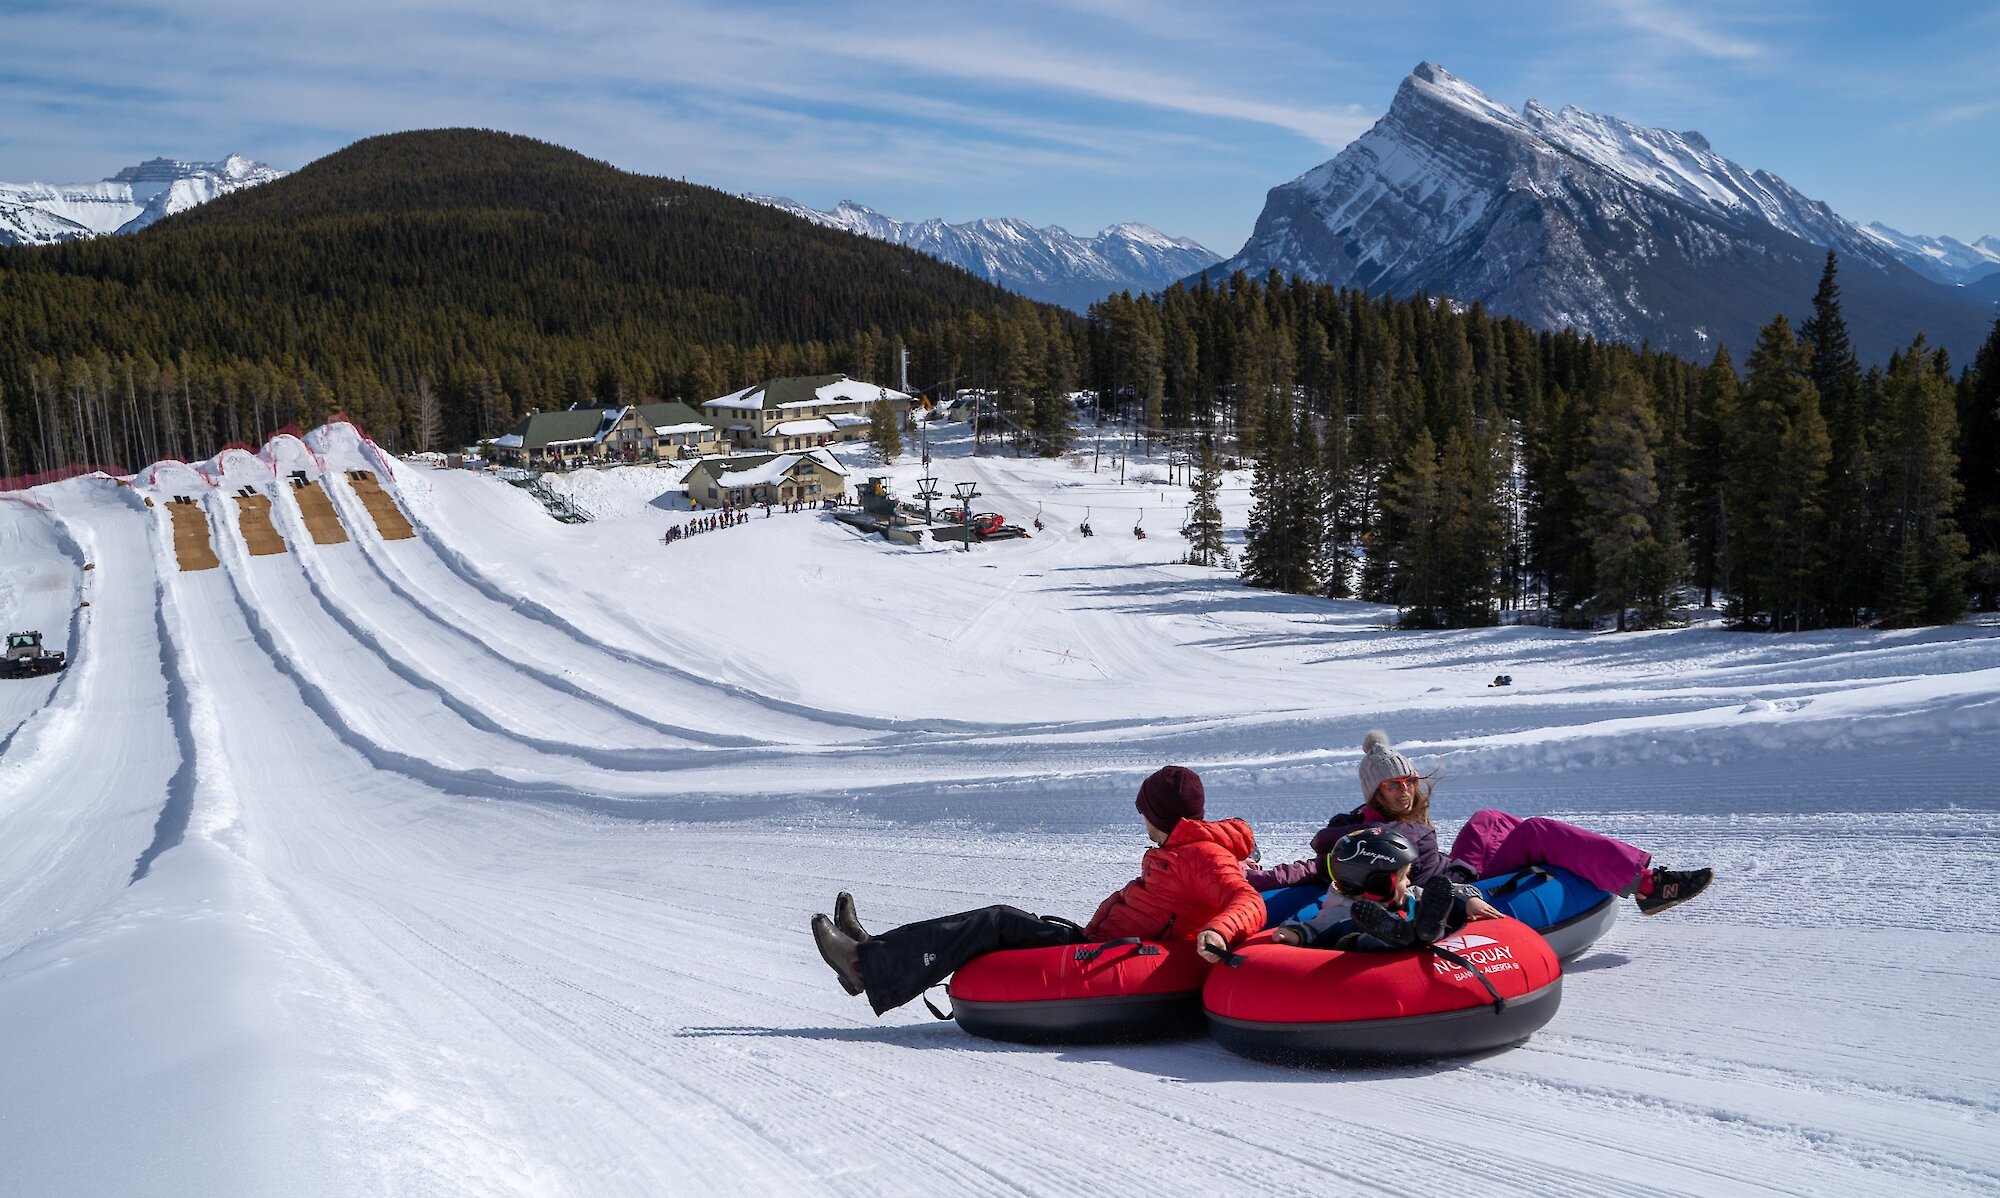 Snow Tubing down the lanes at Mount Norquay